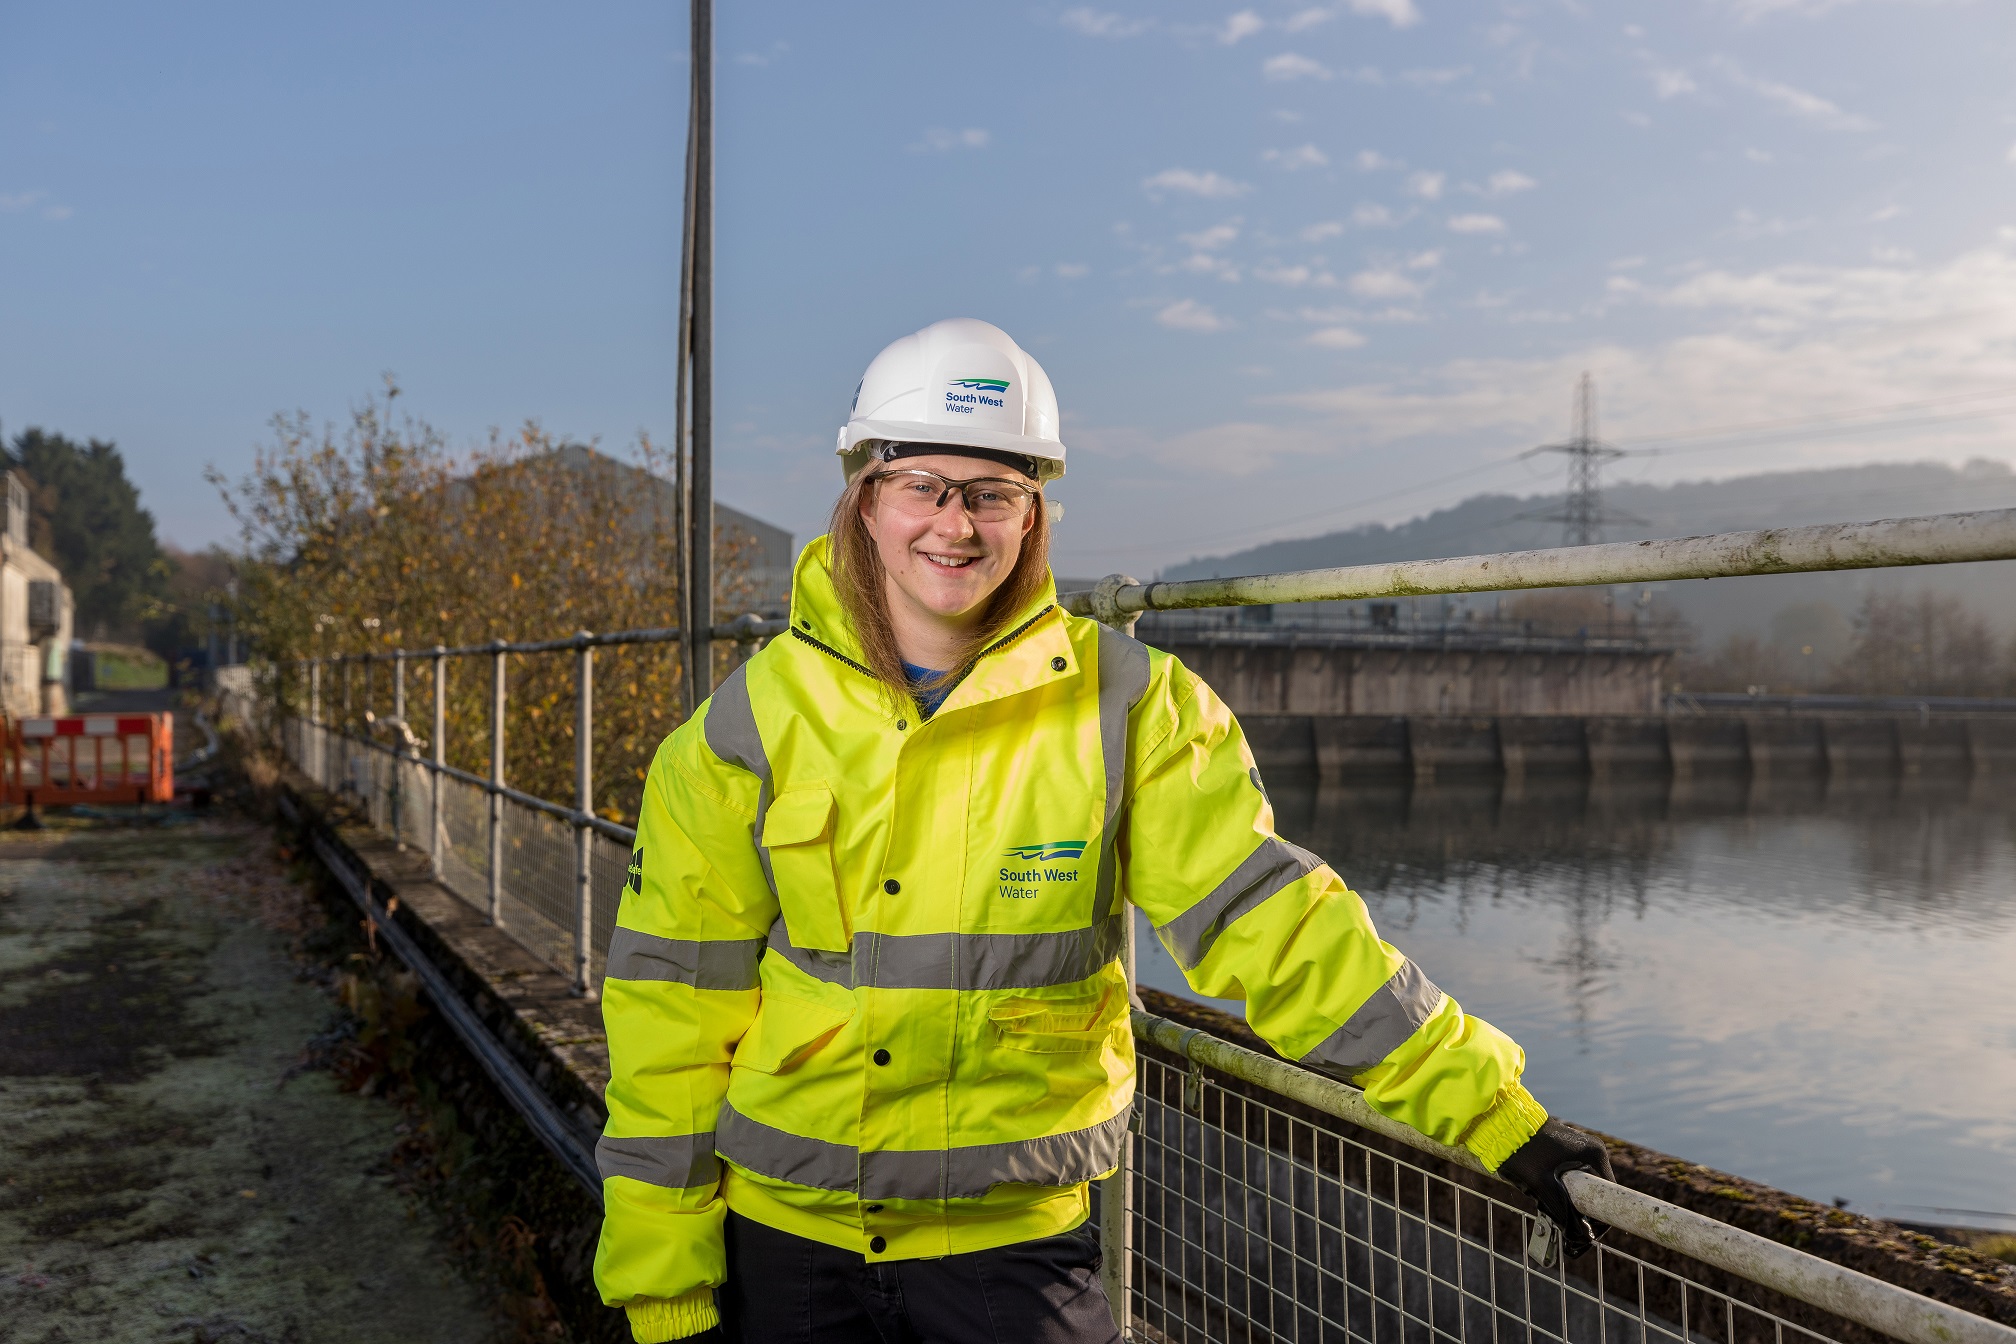 South West Water to kick-start careers for region’s unemployed young people